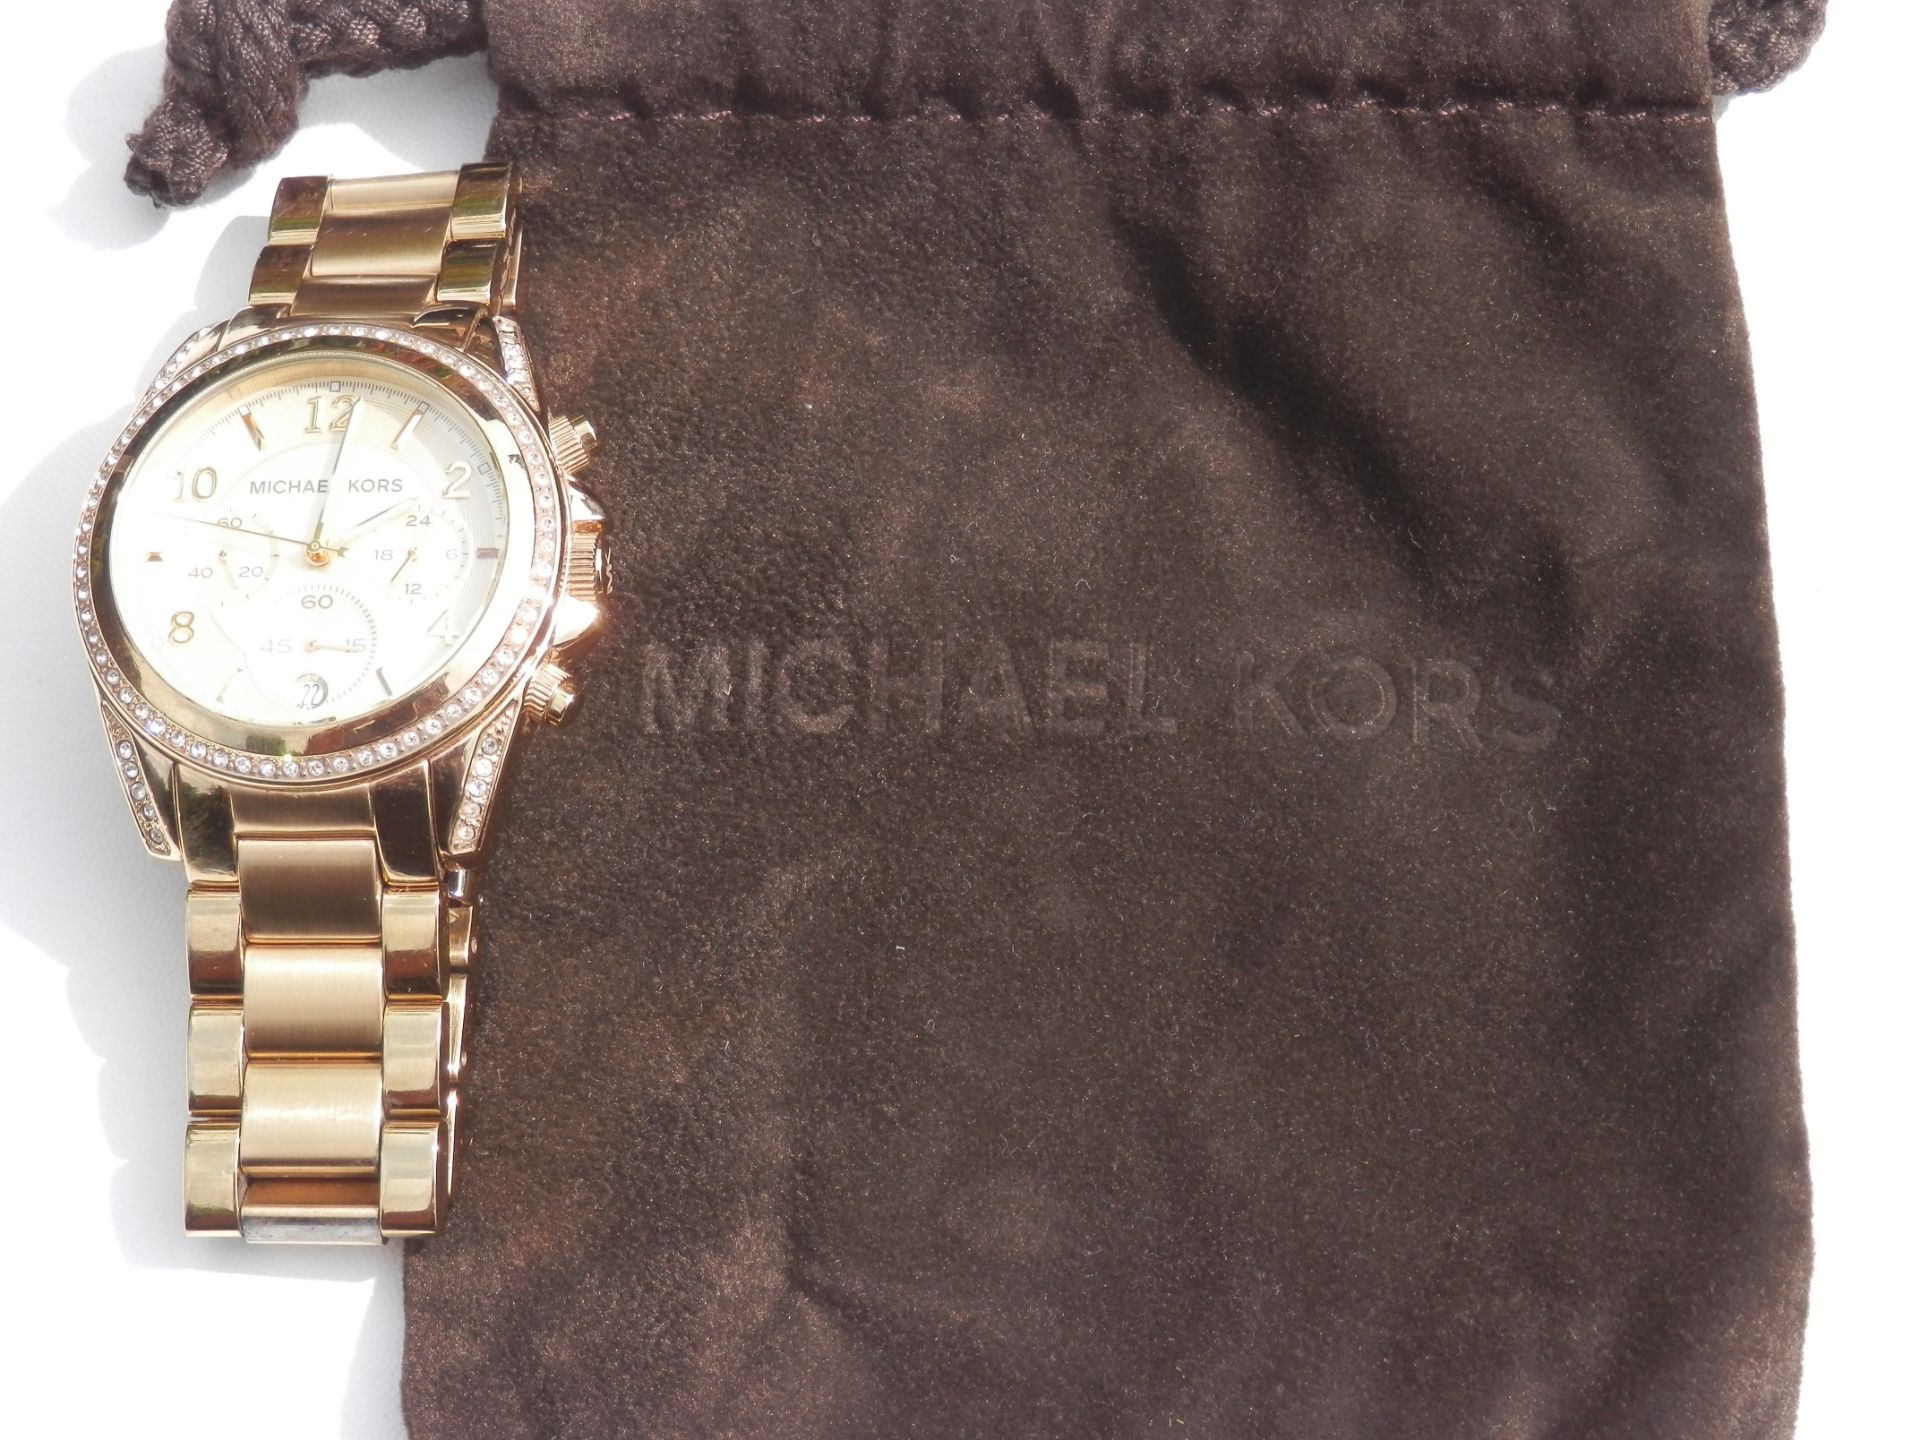 RRP £240. SUPERB LADIES MICHAEL KORS FULL STAINLESS GOLD PLATED DIAMANTE ENCRUSTED CHRONO DATE WATCH - Image 12 of 16